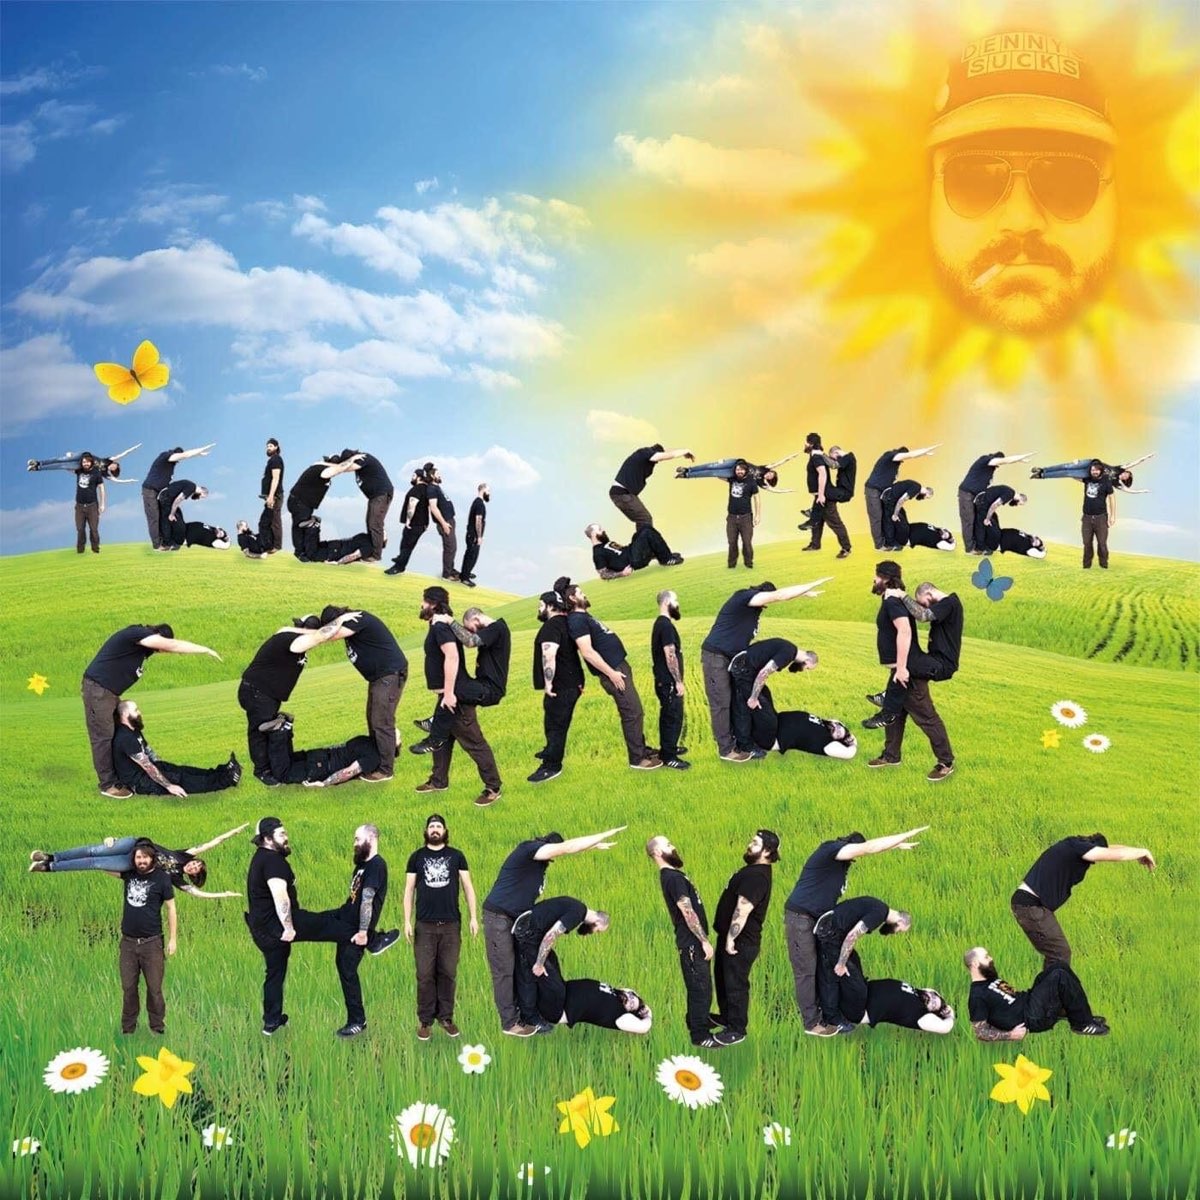 Tejon street corner. Tejon Street Corner Thieves. Tejon Street Corner Thieves Whiskey. Tejon Street Corner Thieves группа. Tejon Street Corner Thieves every last Drop.